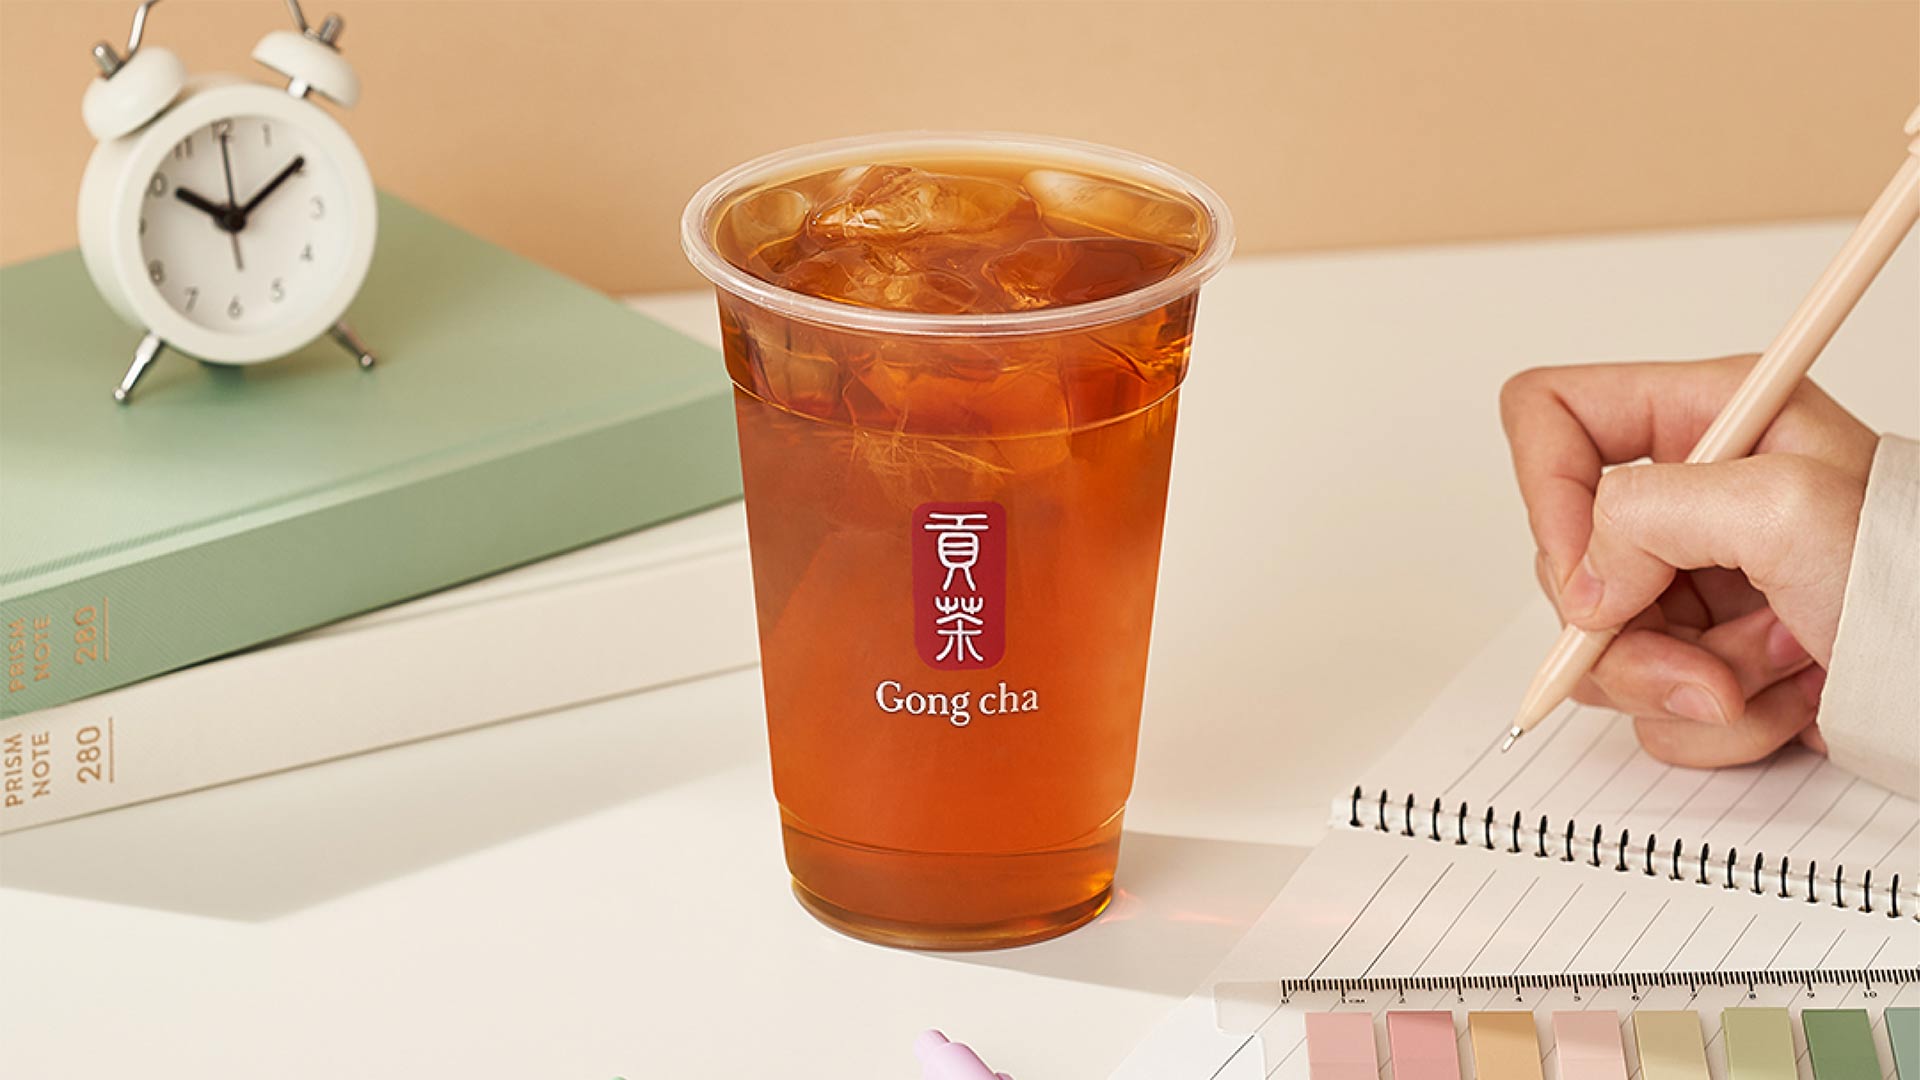 Gong cha support with design